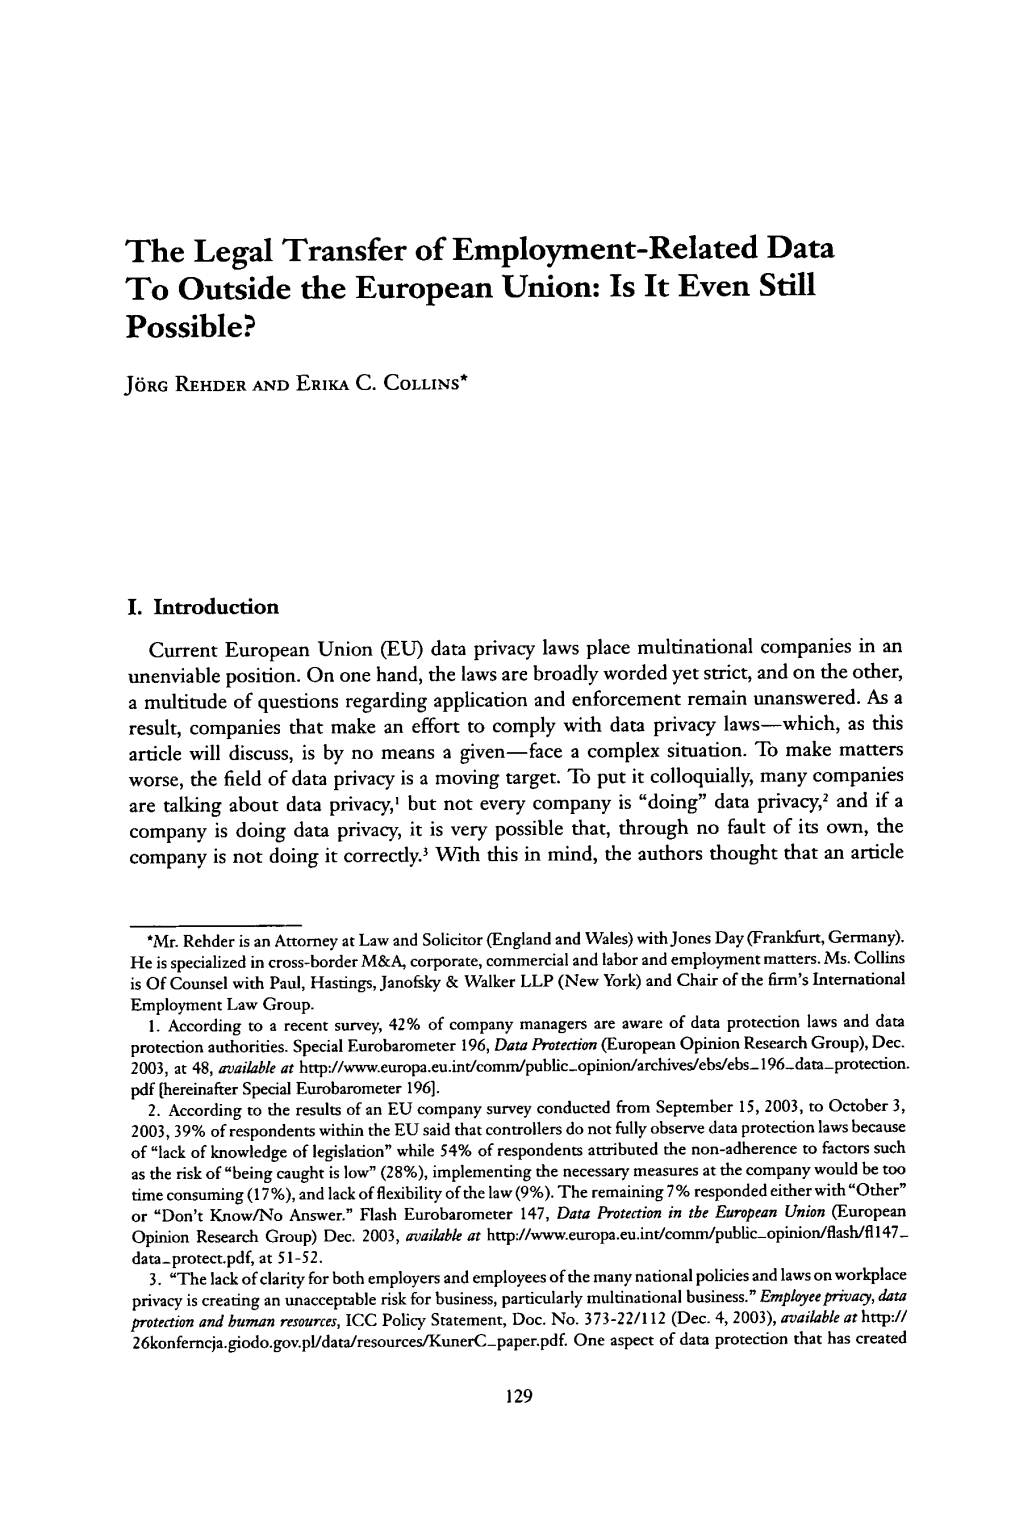 The Legal Transfer of Employment-Related Data to Outside the European Union: Is It Even Still Possible?